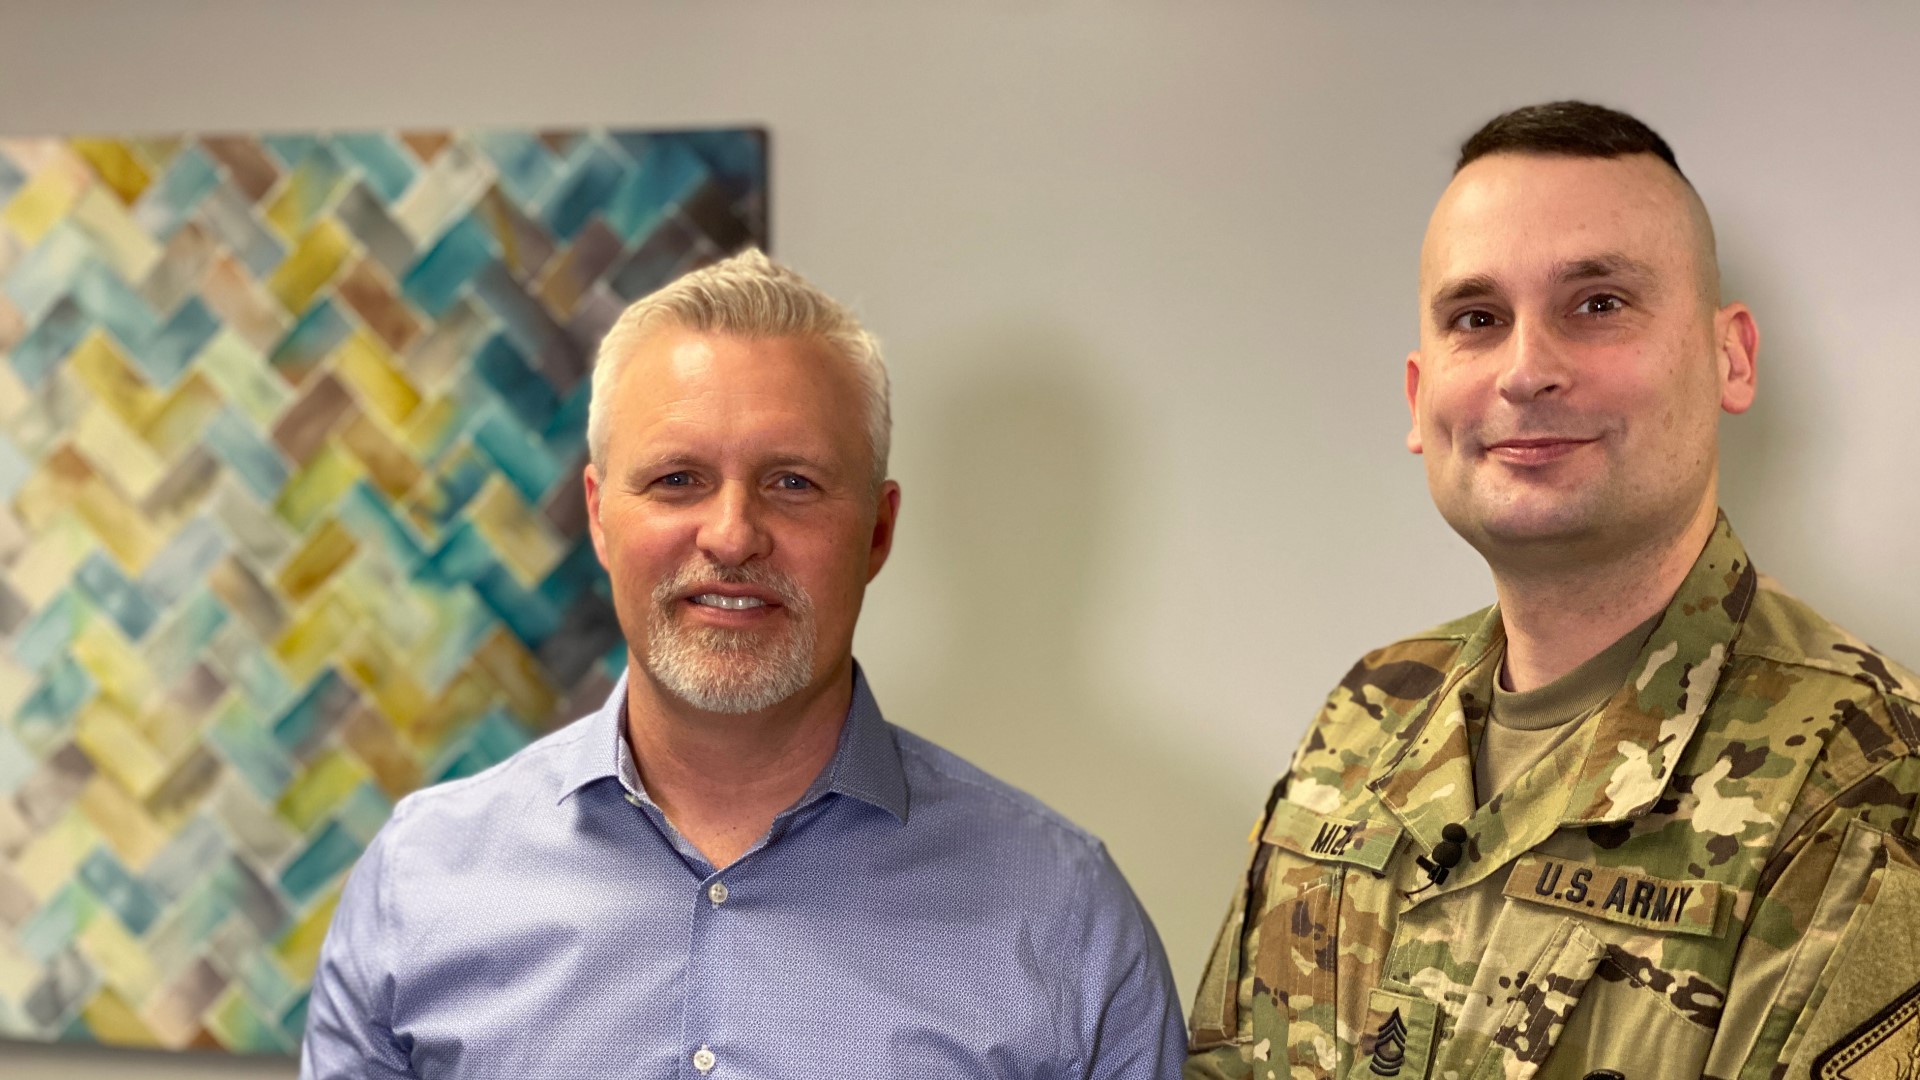 A free counseling program launched in 2016 by a Knoxville non-profit is treating military veterans and their families.